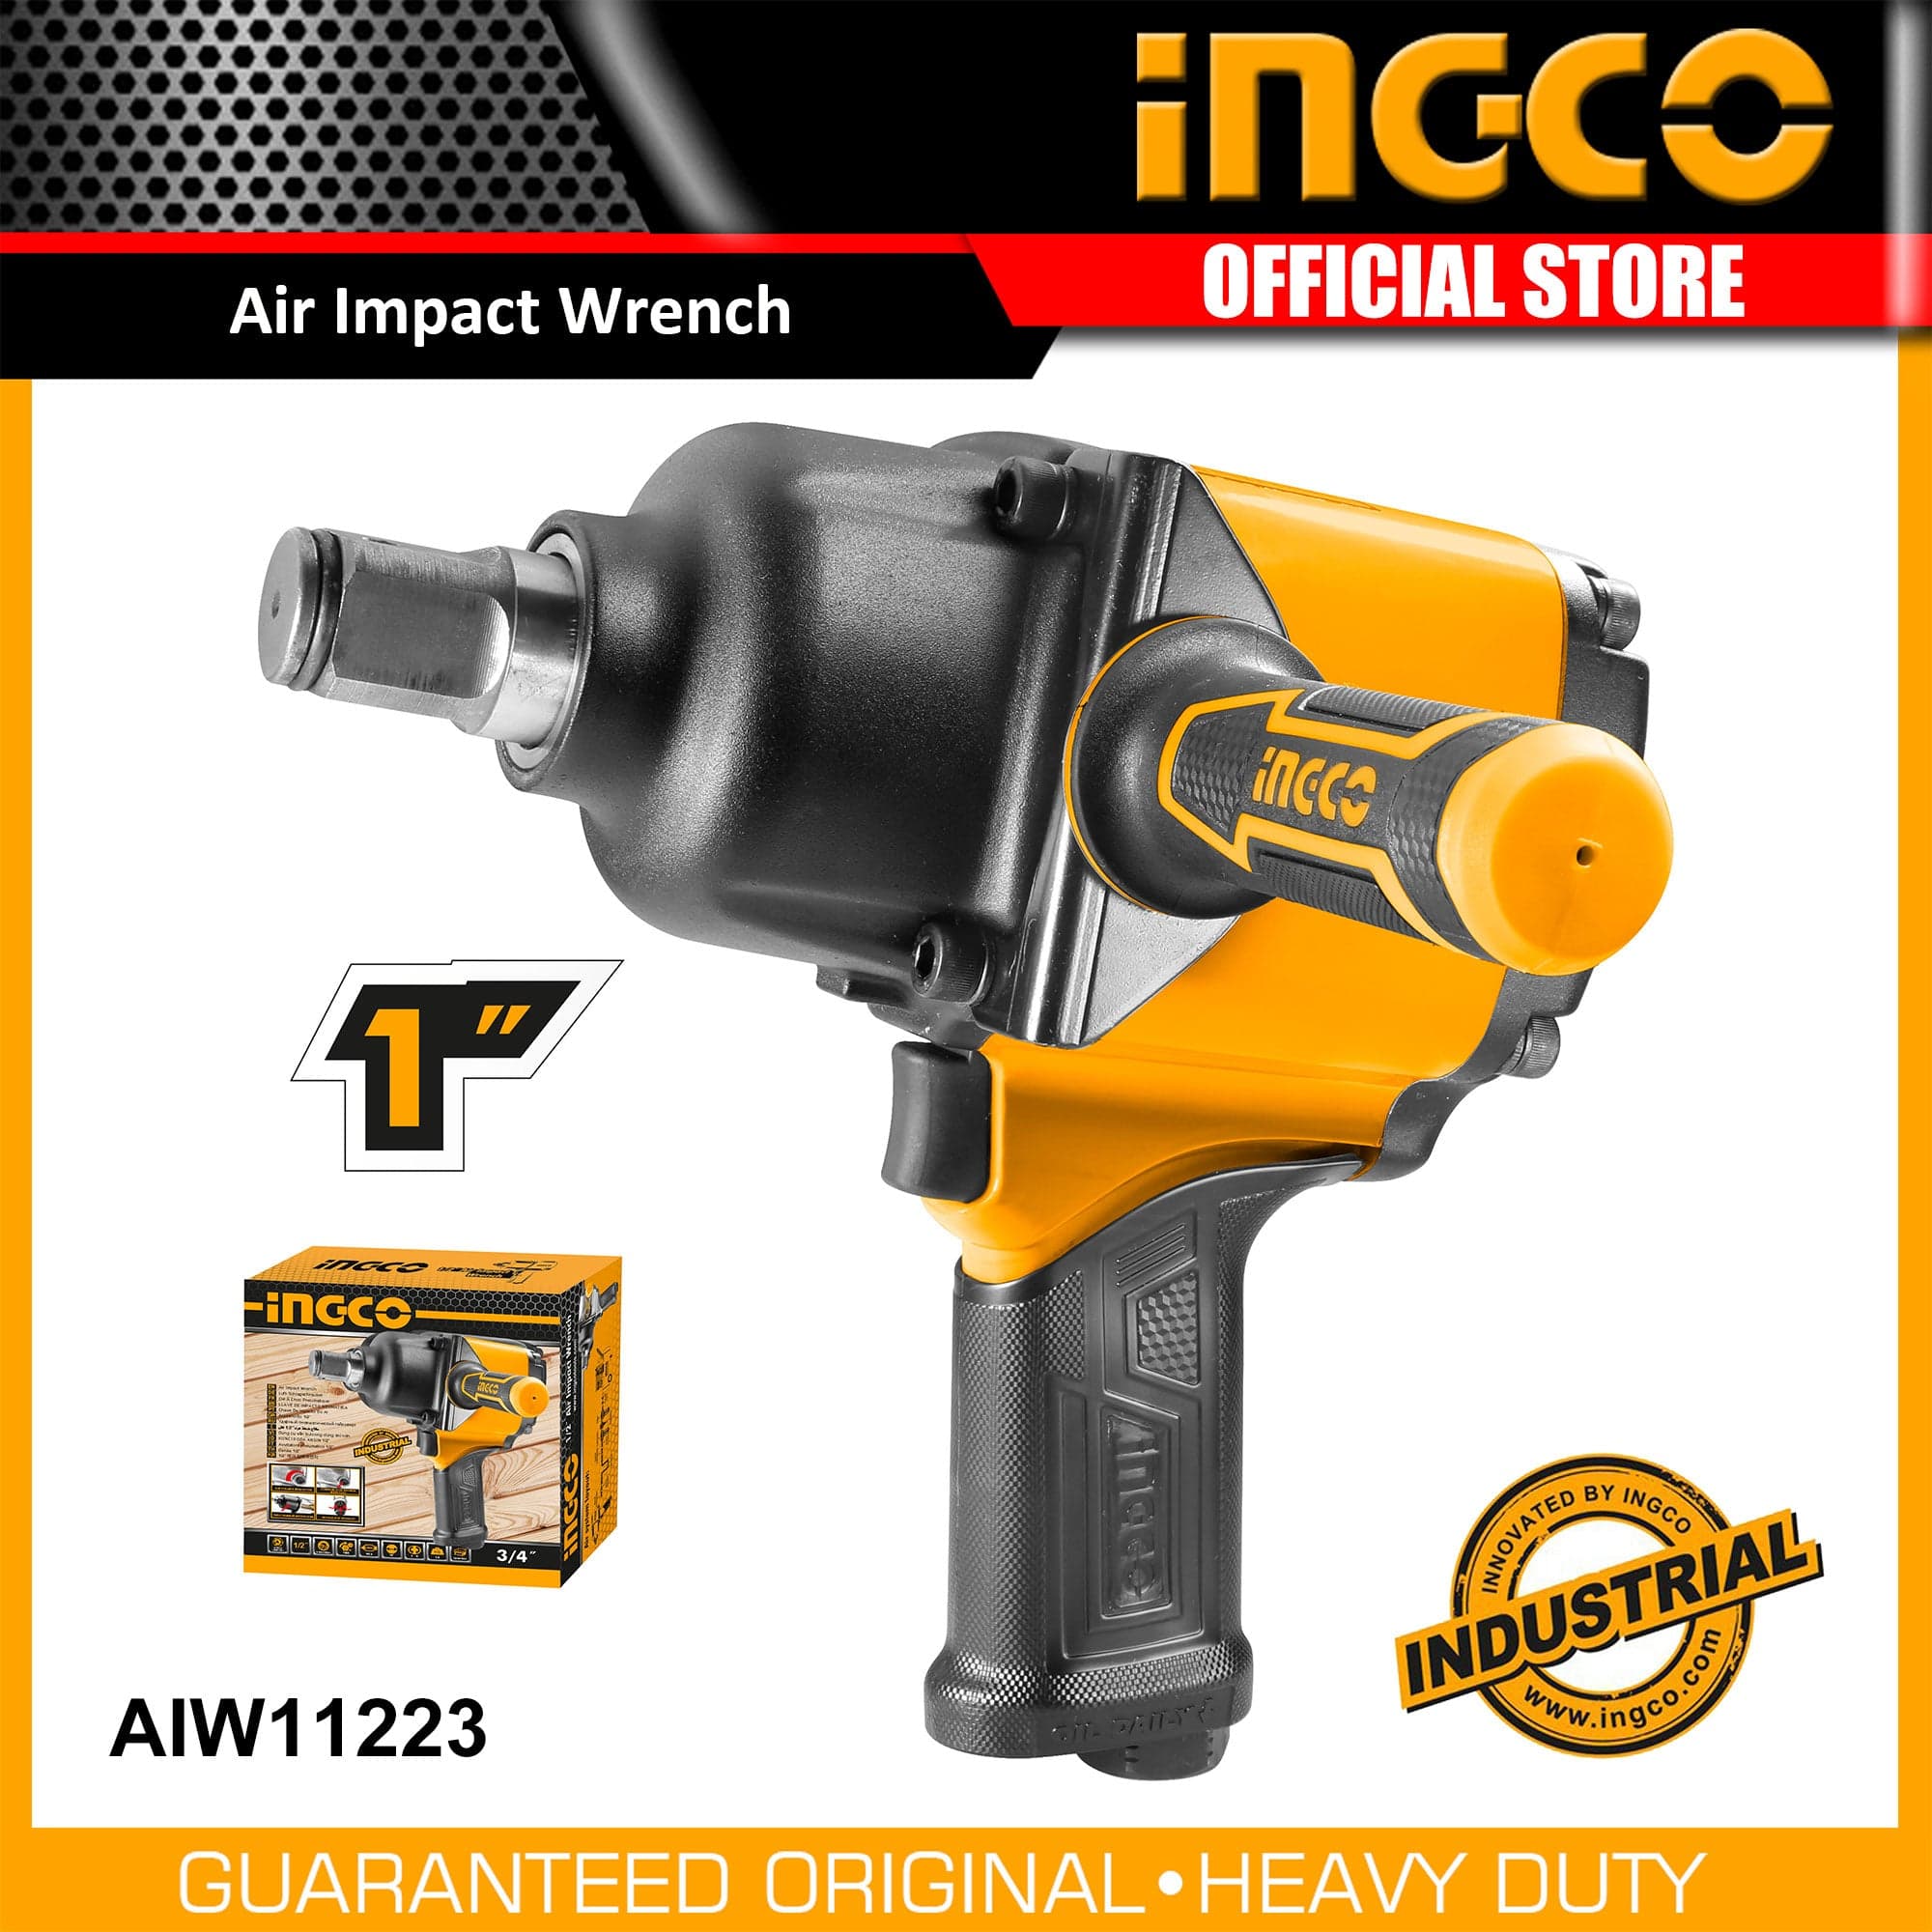 Ingco 1″ Air Impact Wrench - AIW11223 | Supply Master | Accra, Ghana Impact Wrench & Driver Buy Tools hardware Building materials